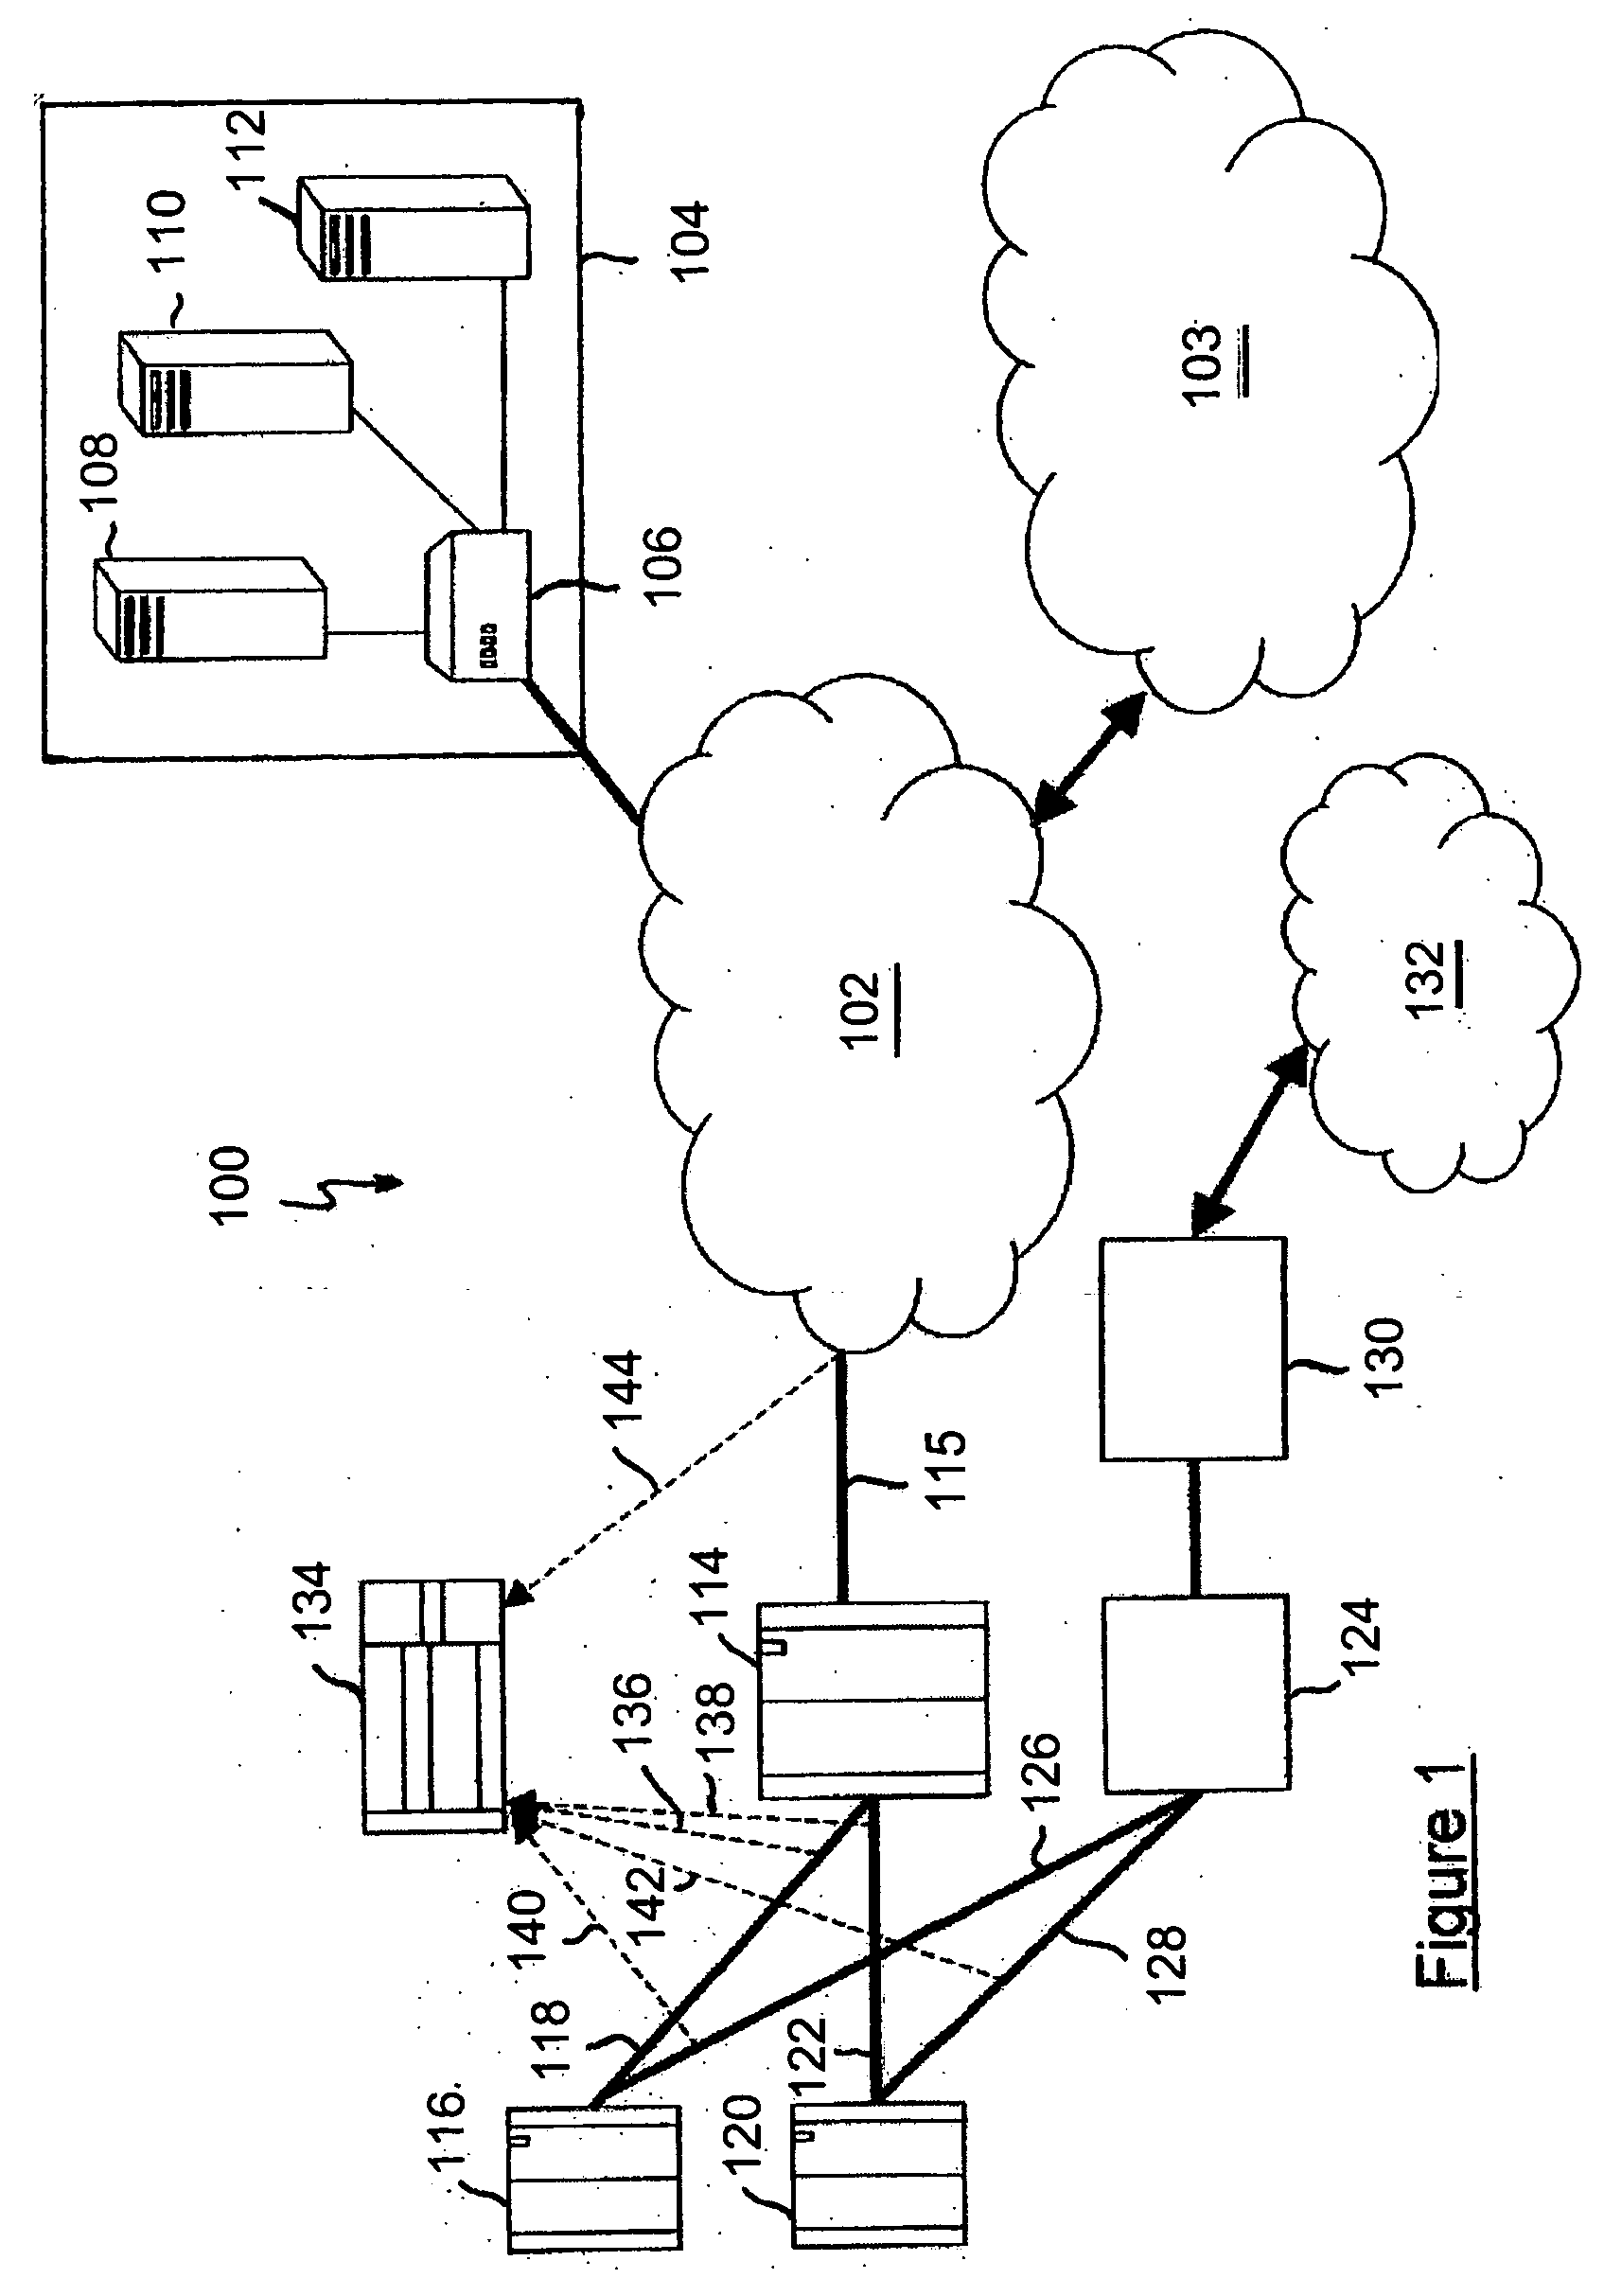 System, apparatus and method for detecting malicious traffic in a communications network